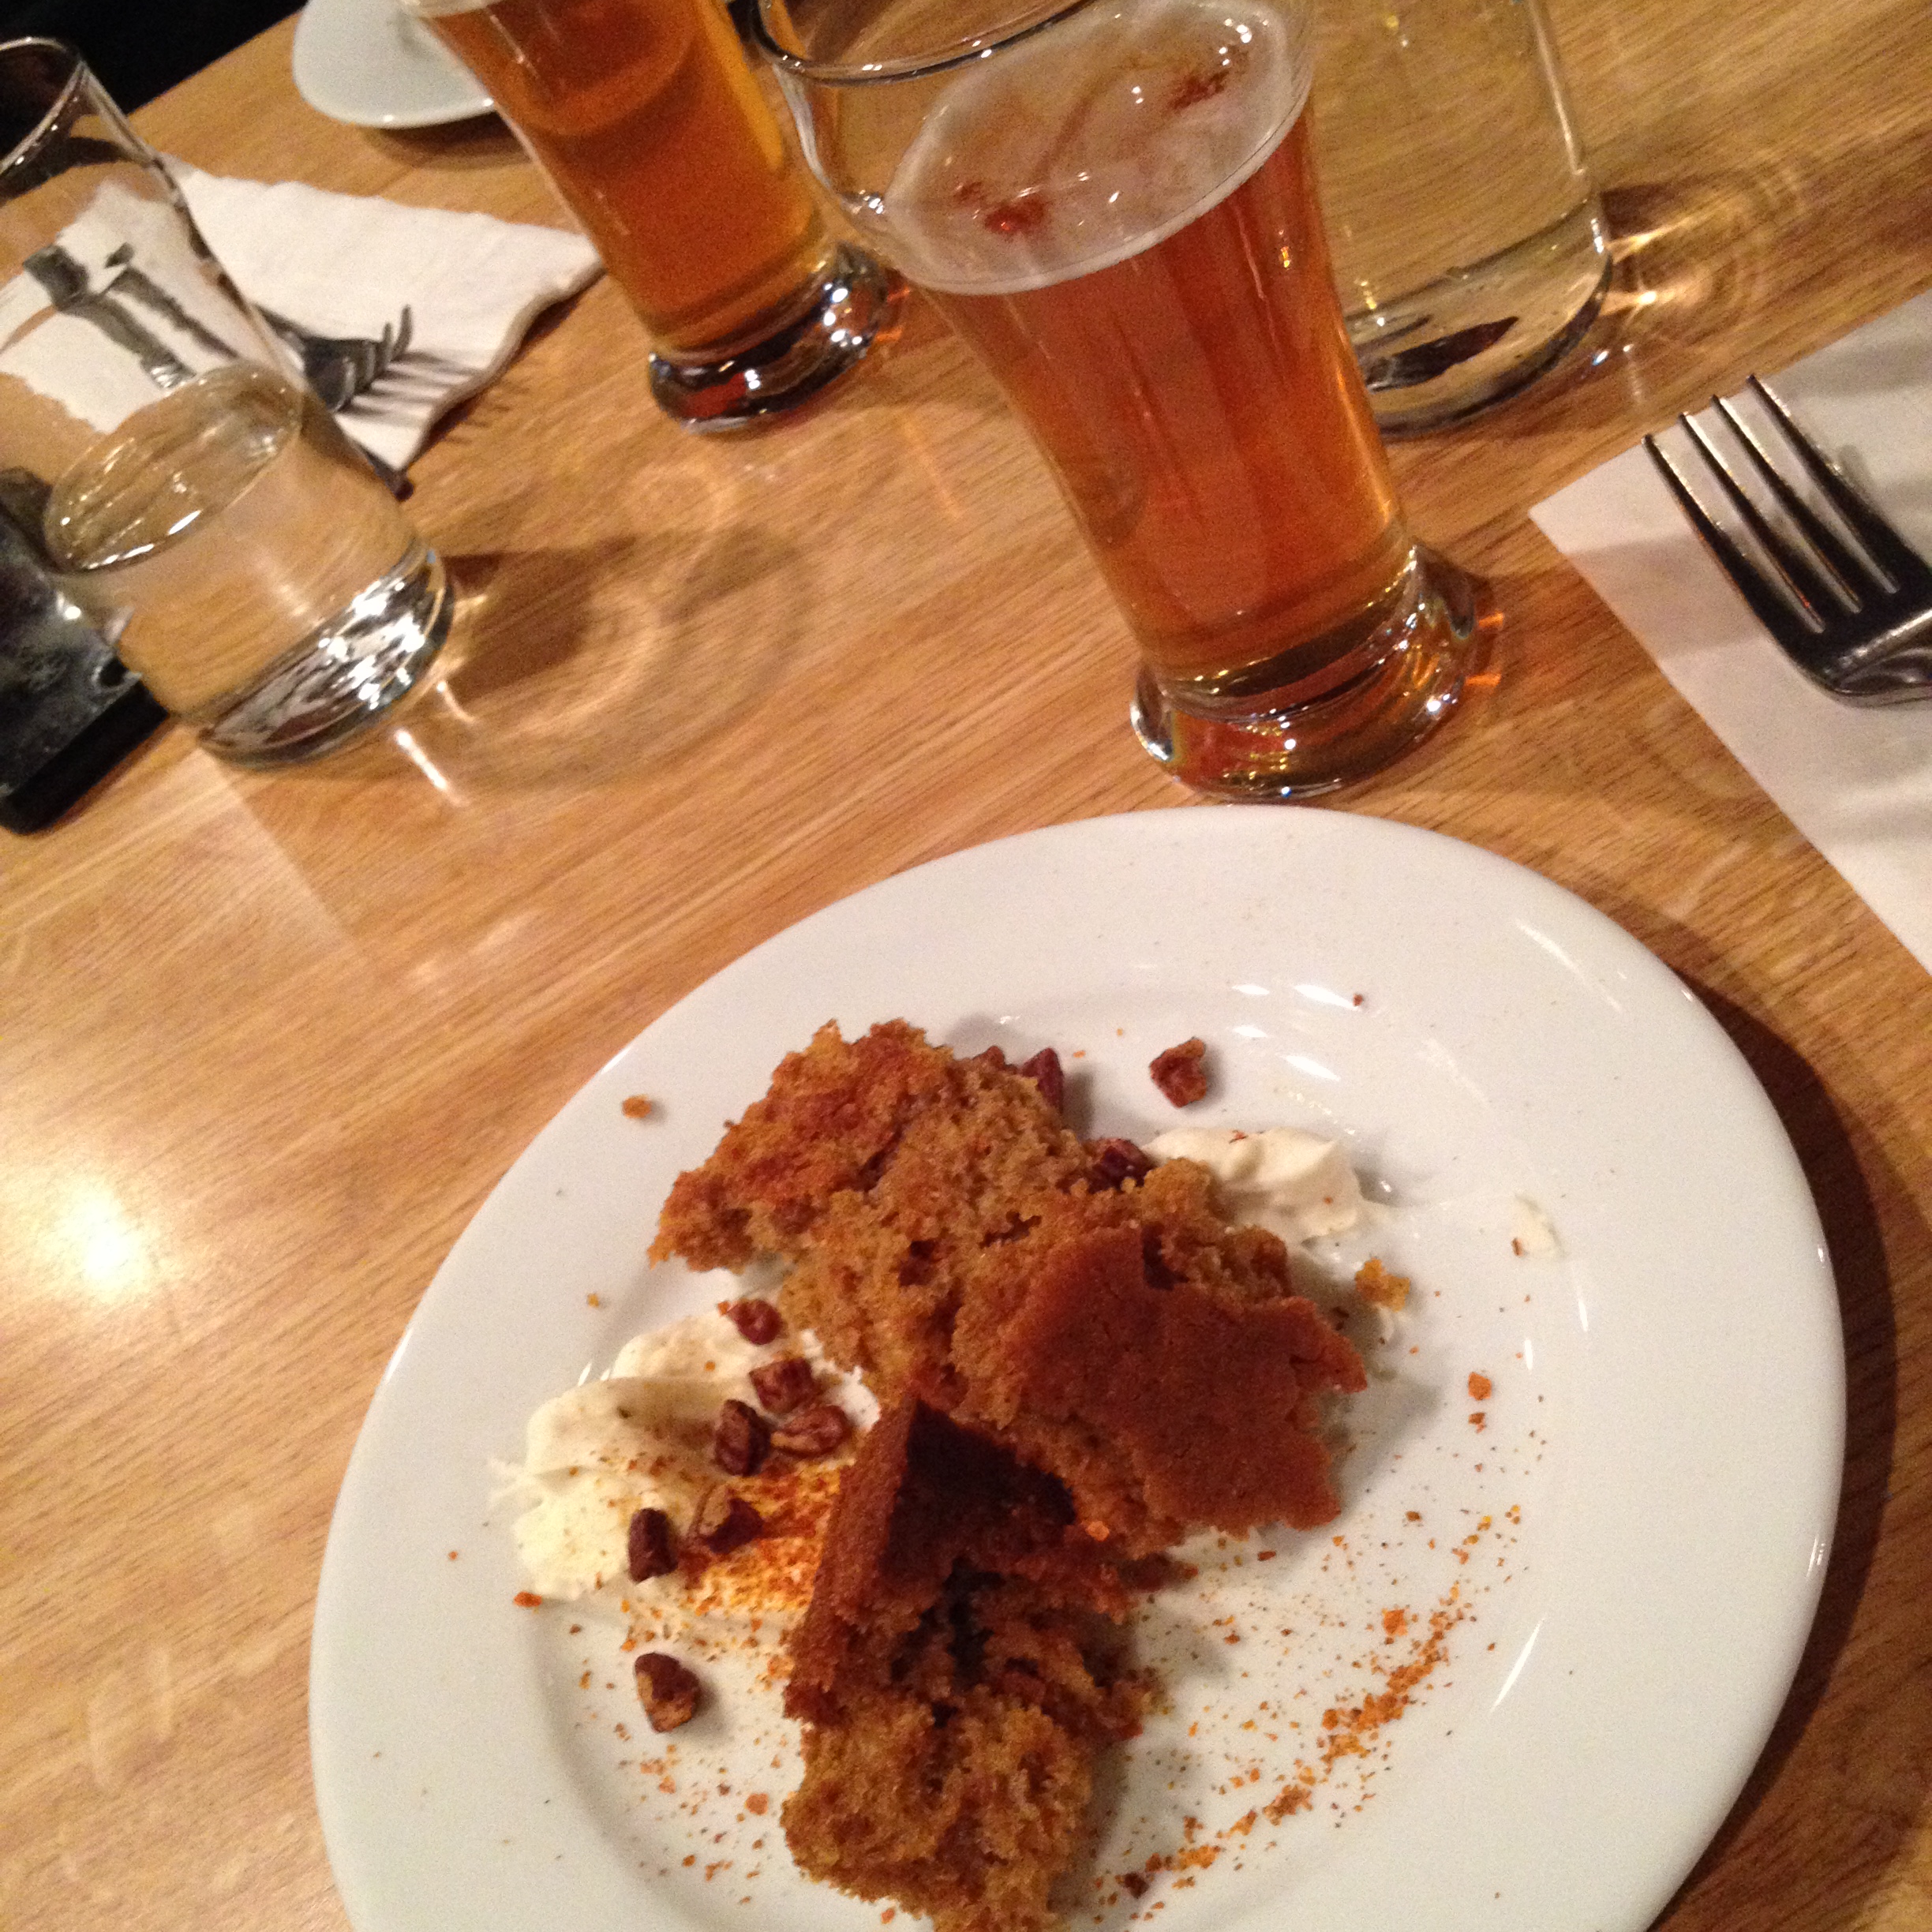 Figure 5. The final course was carrot cake, cream cheese panna cotta, carrot powder, spiced pecans paired with Hubris (extreme hoppy).